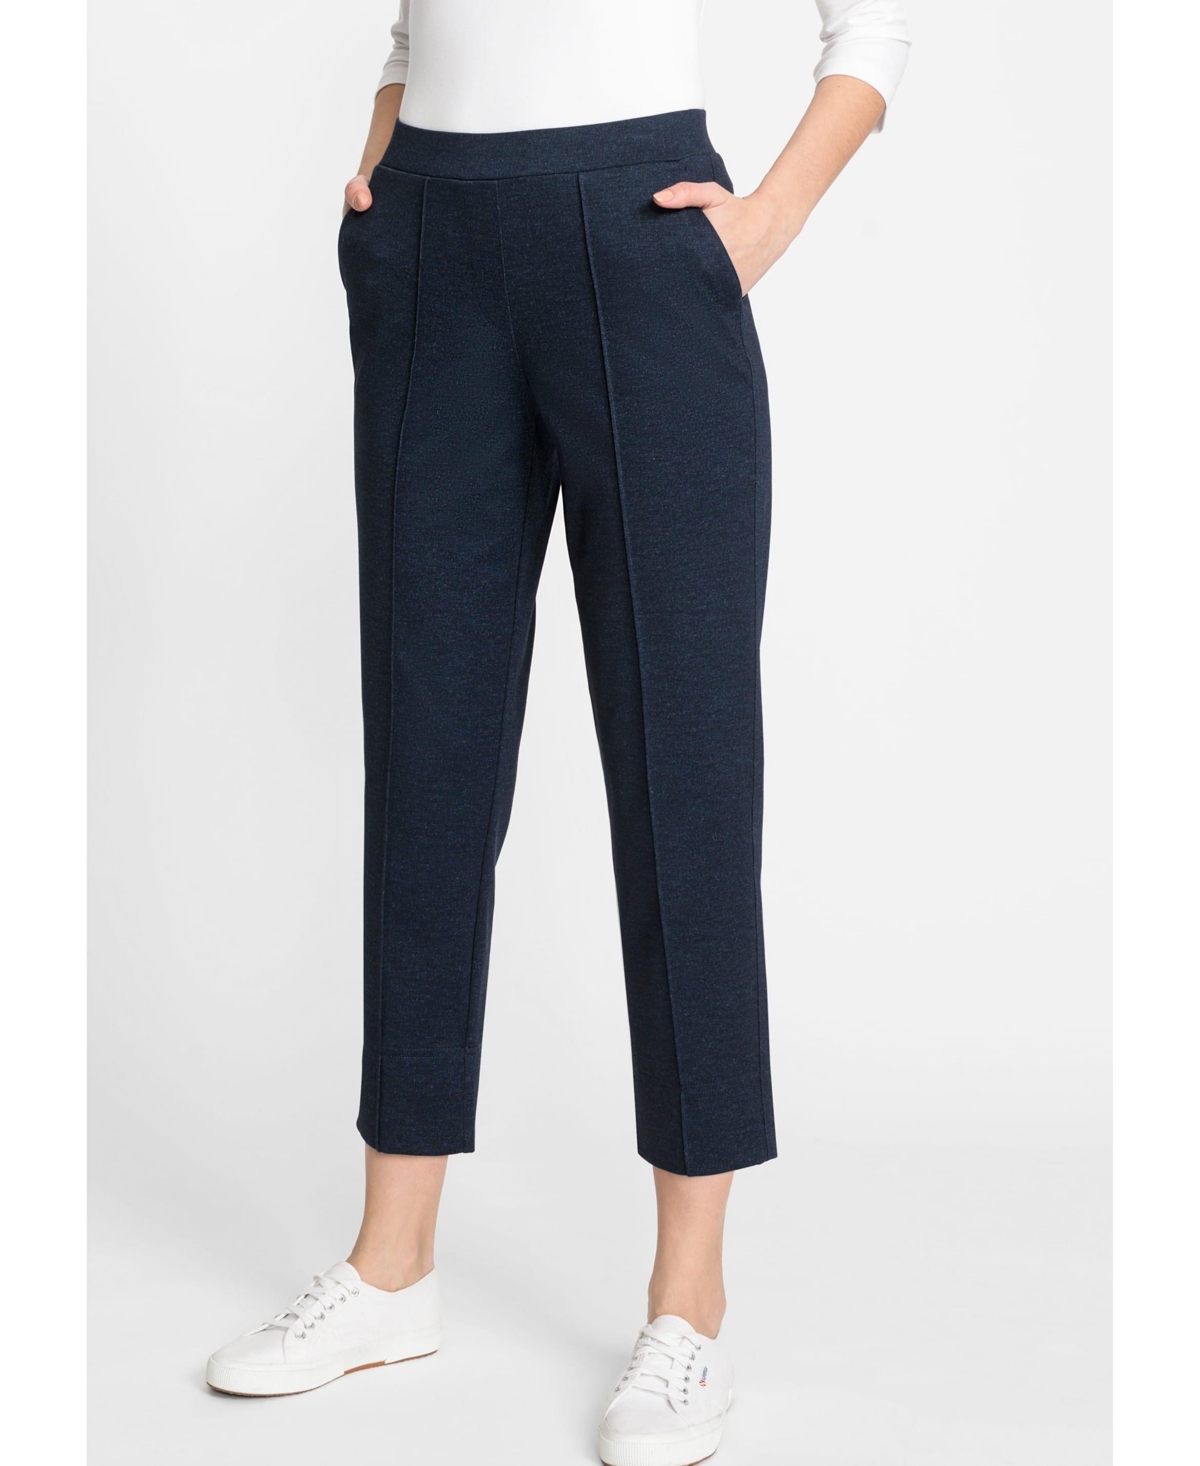 Women's Mona Fit Straight Leg Cropped Jersey Pull-On Pant - Ink blue